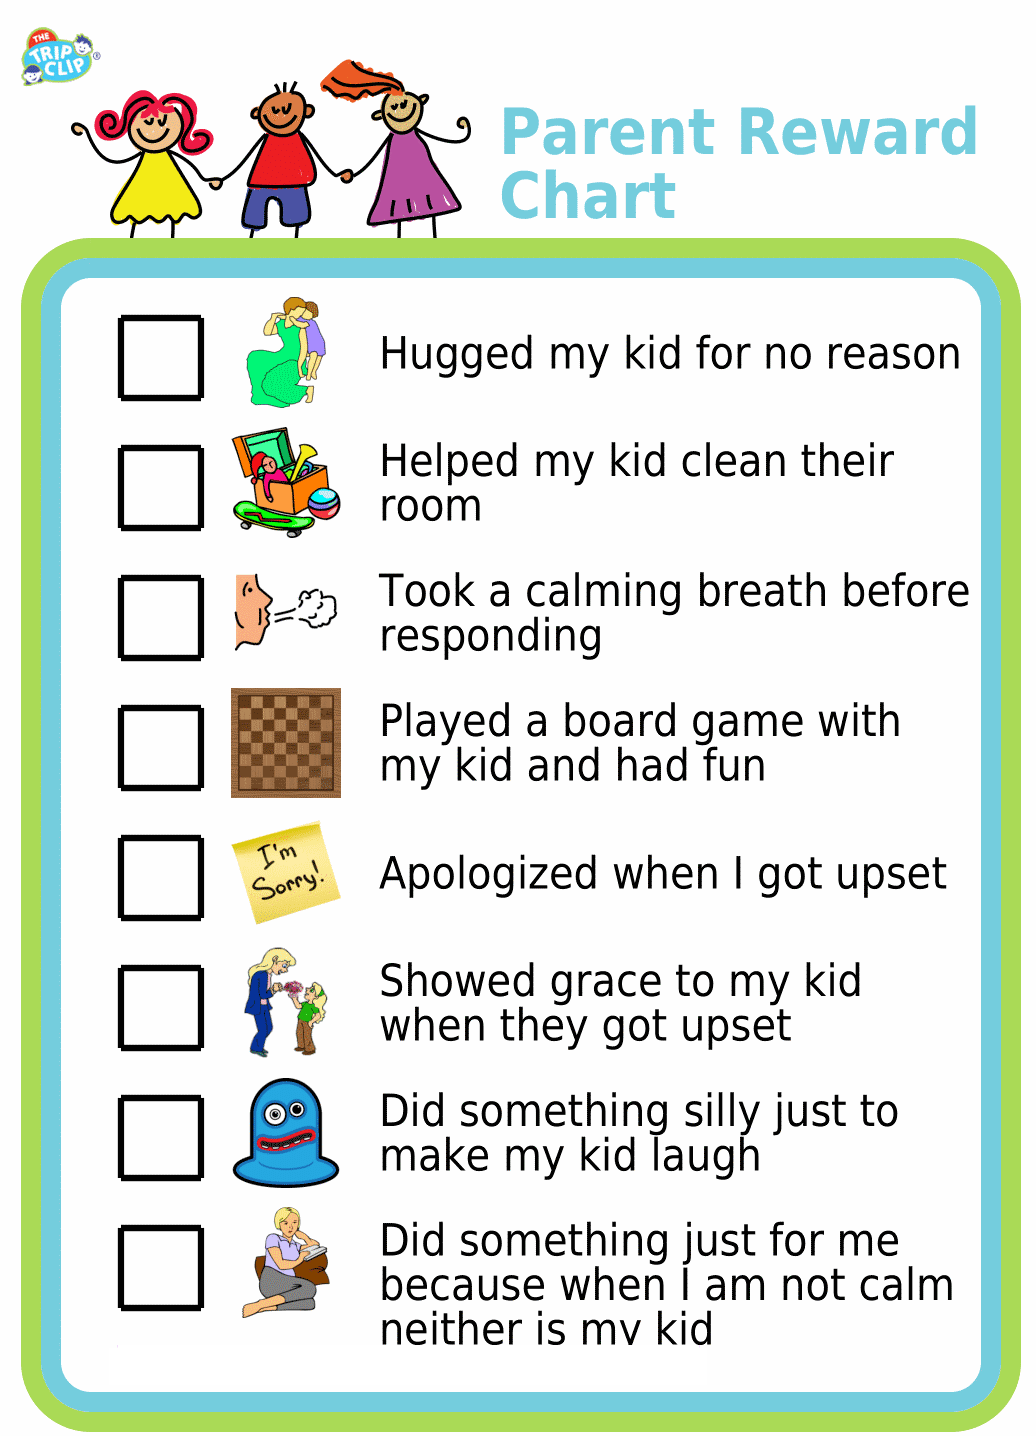 Picture checklists reminding parents to hug their kids and show them grace